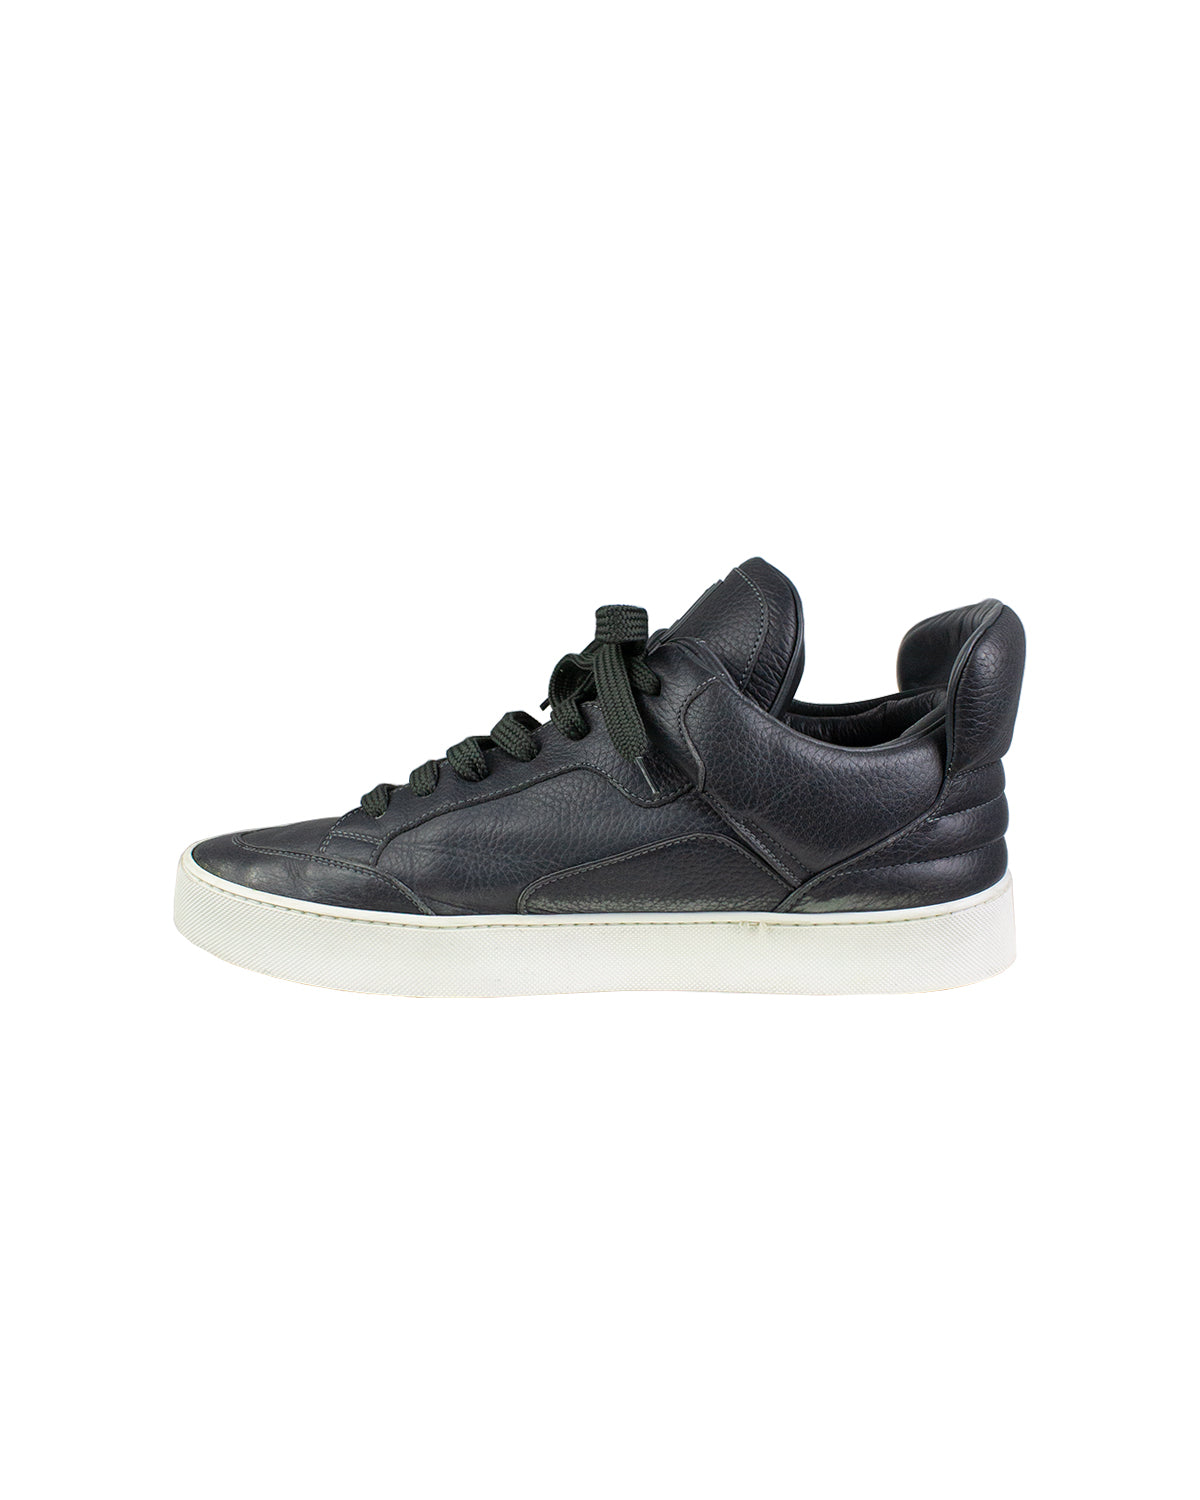 Louis Vuitton x Kanye West “Don” anthracite sneaker LV size 8